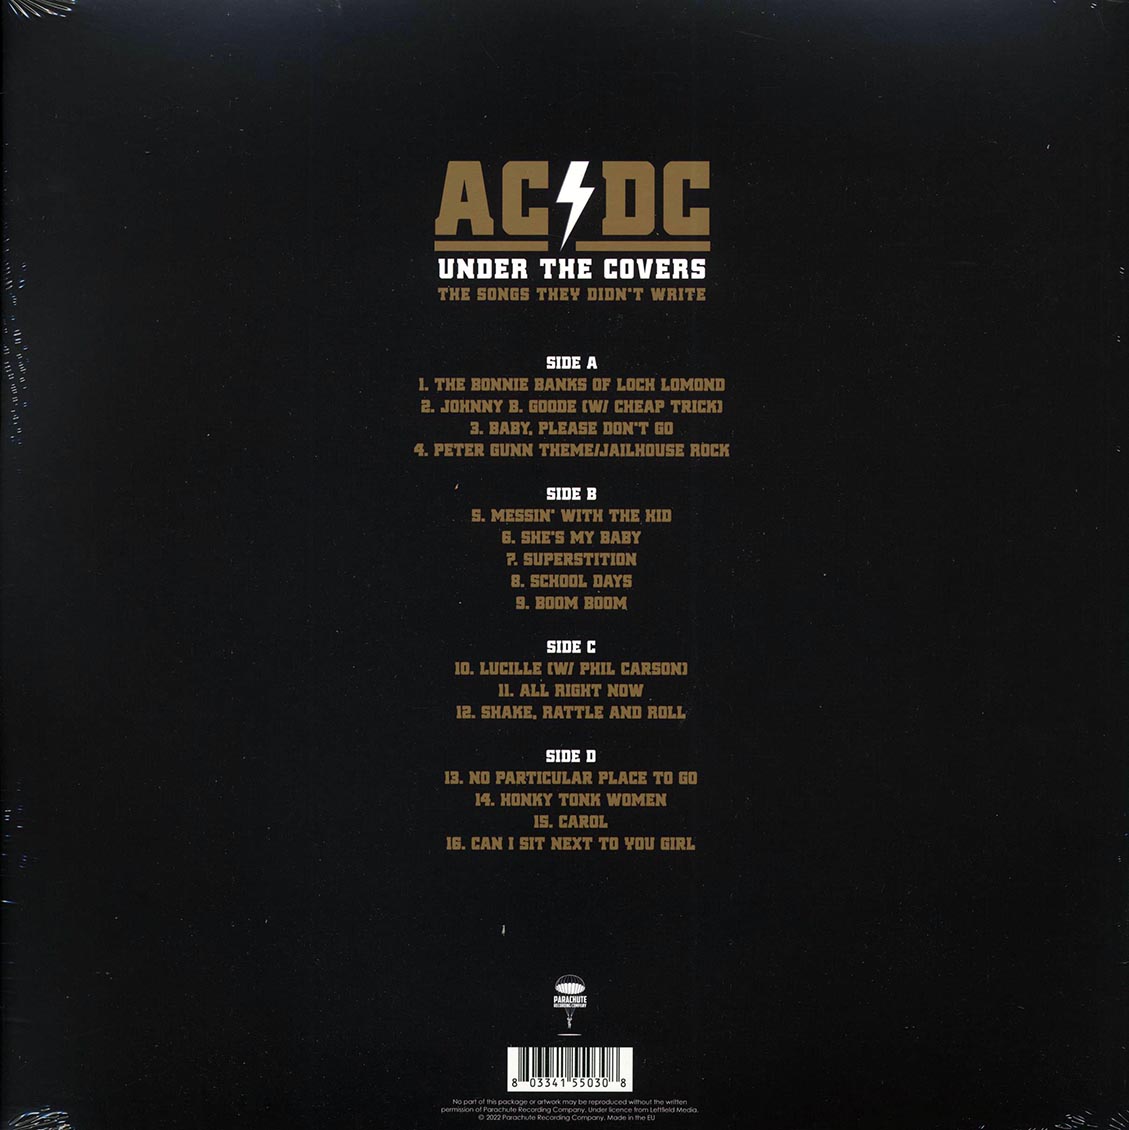 AC/DC - Under The Covers: The Songs They Didn't Write (2xLP) - Vinyl LP, LP